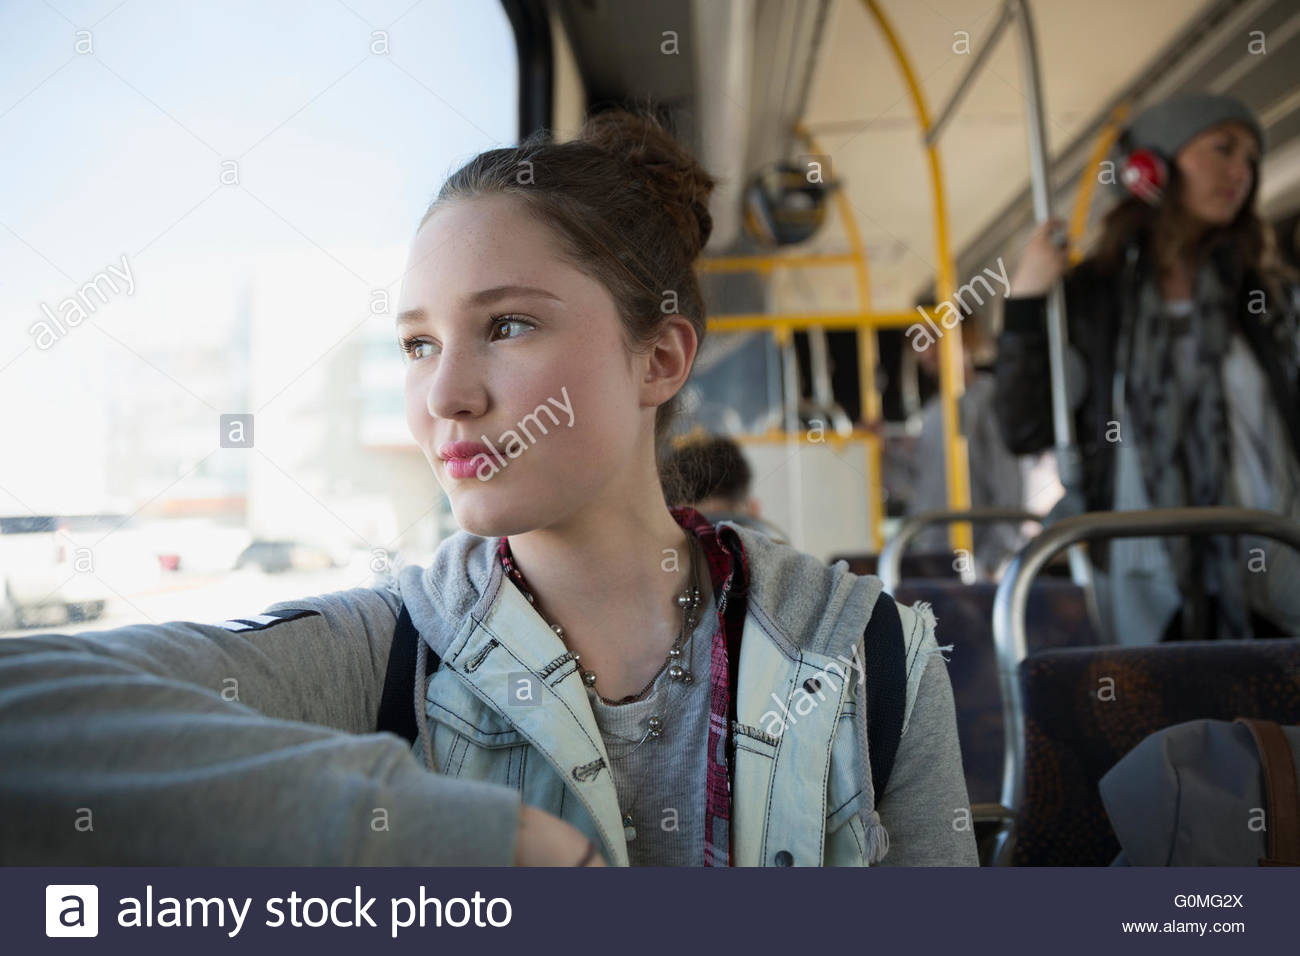 Pensive teenage girl riding bus looking out window Stock Photo